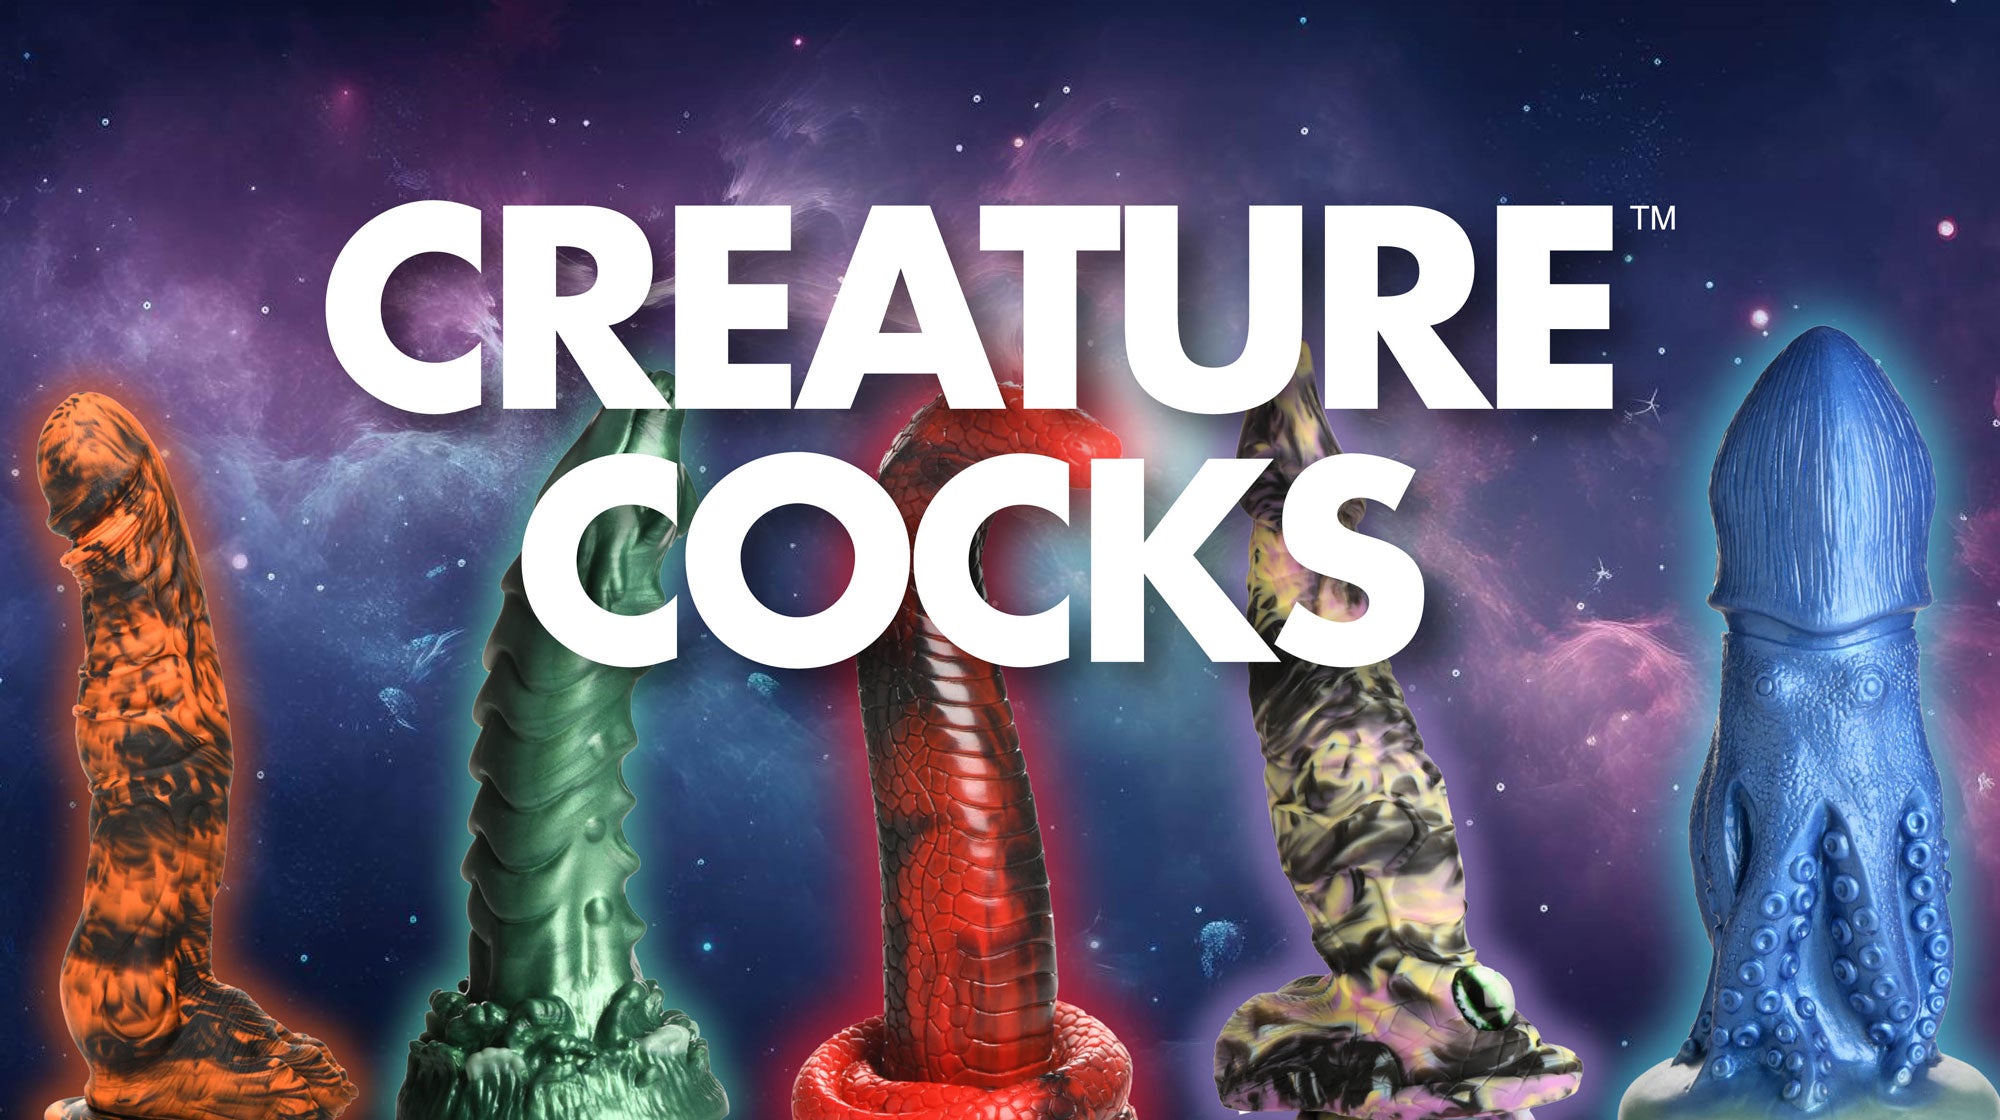 Unleash Your Wildest Fantasies with Creature Cocks - A Guide to Fantasy Sex Toys